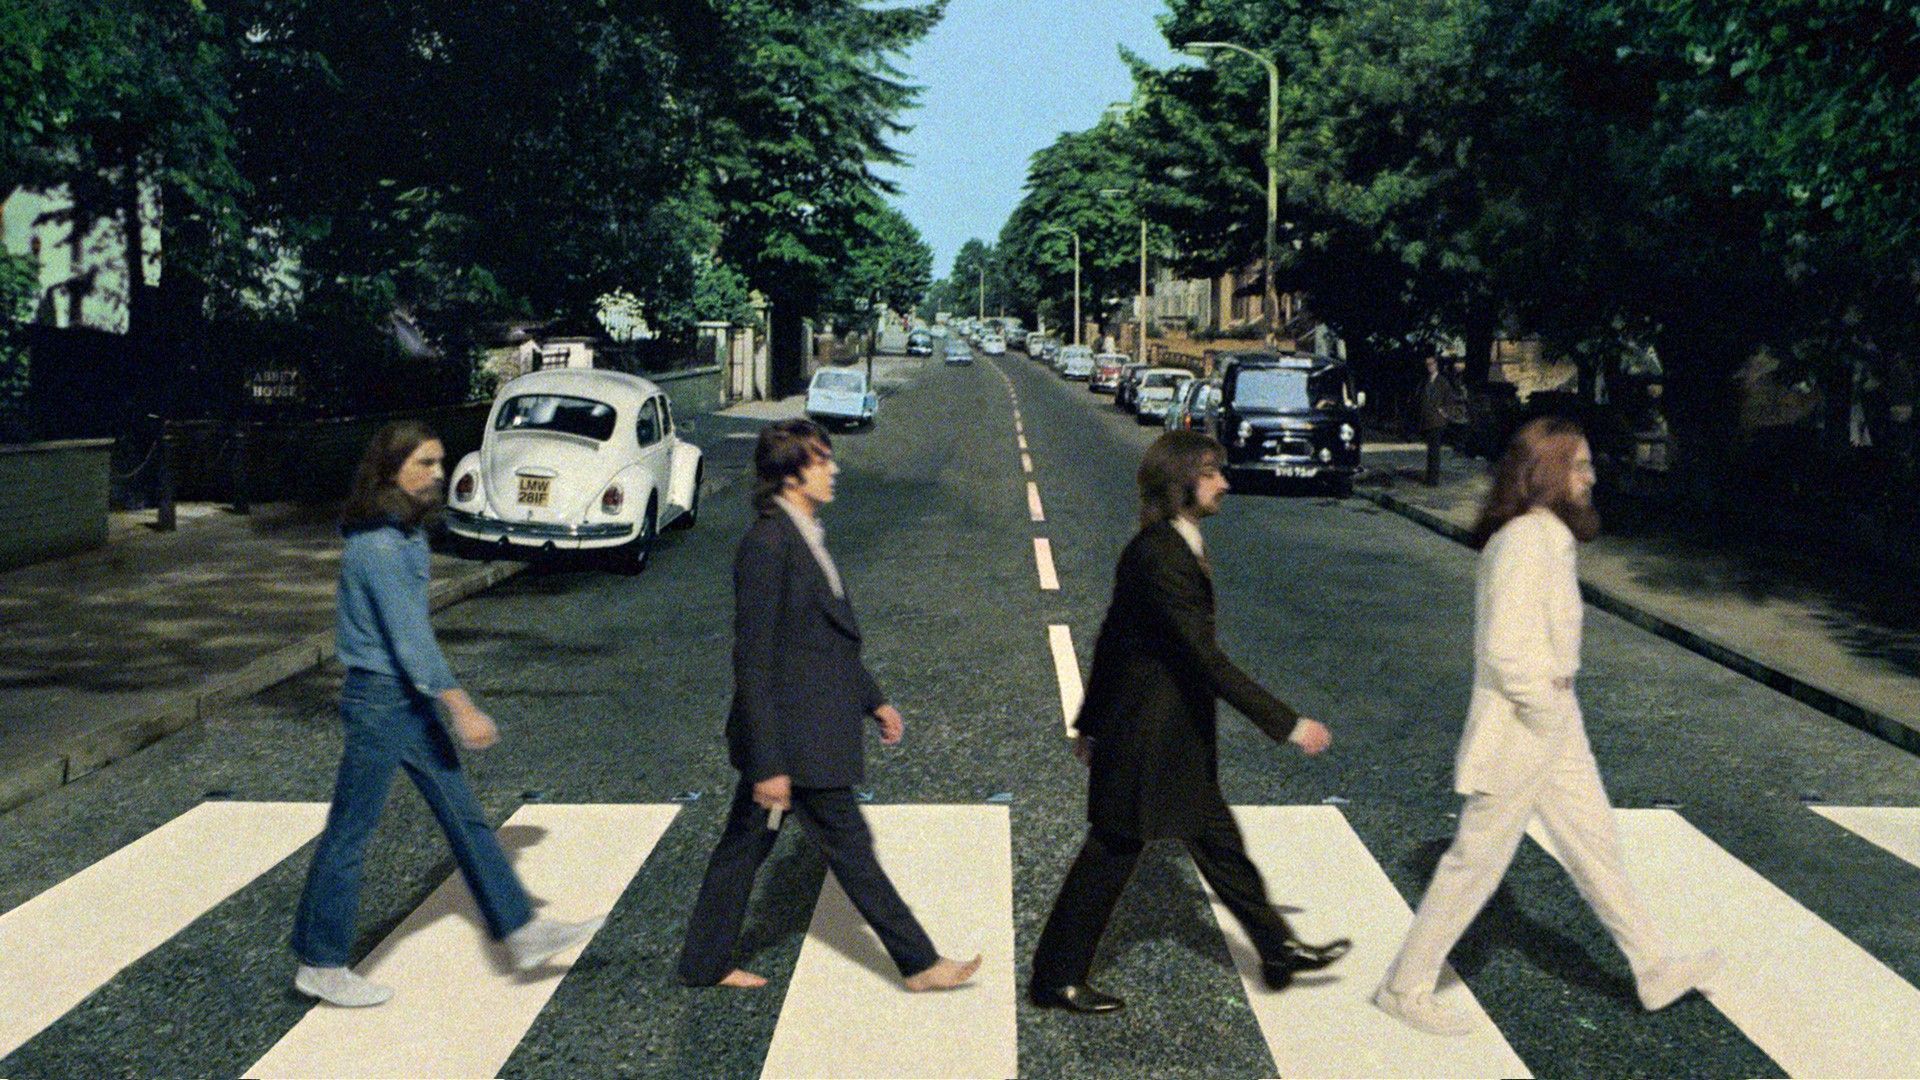 The Beatles HD Wallpapers and Backgrounds